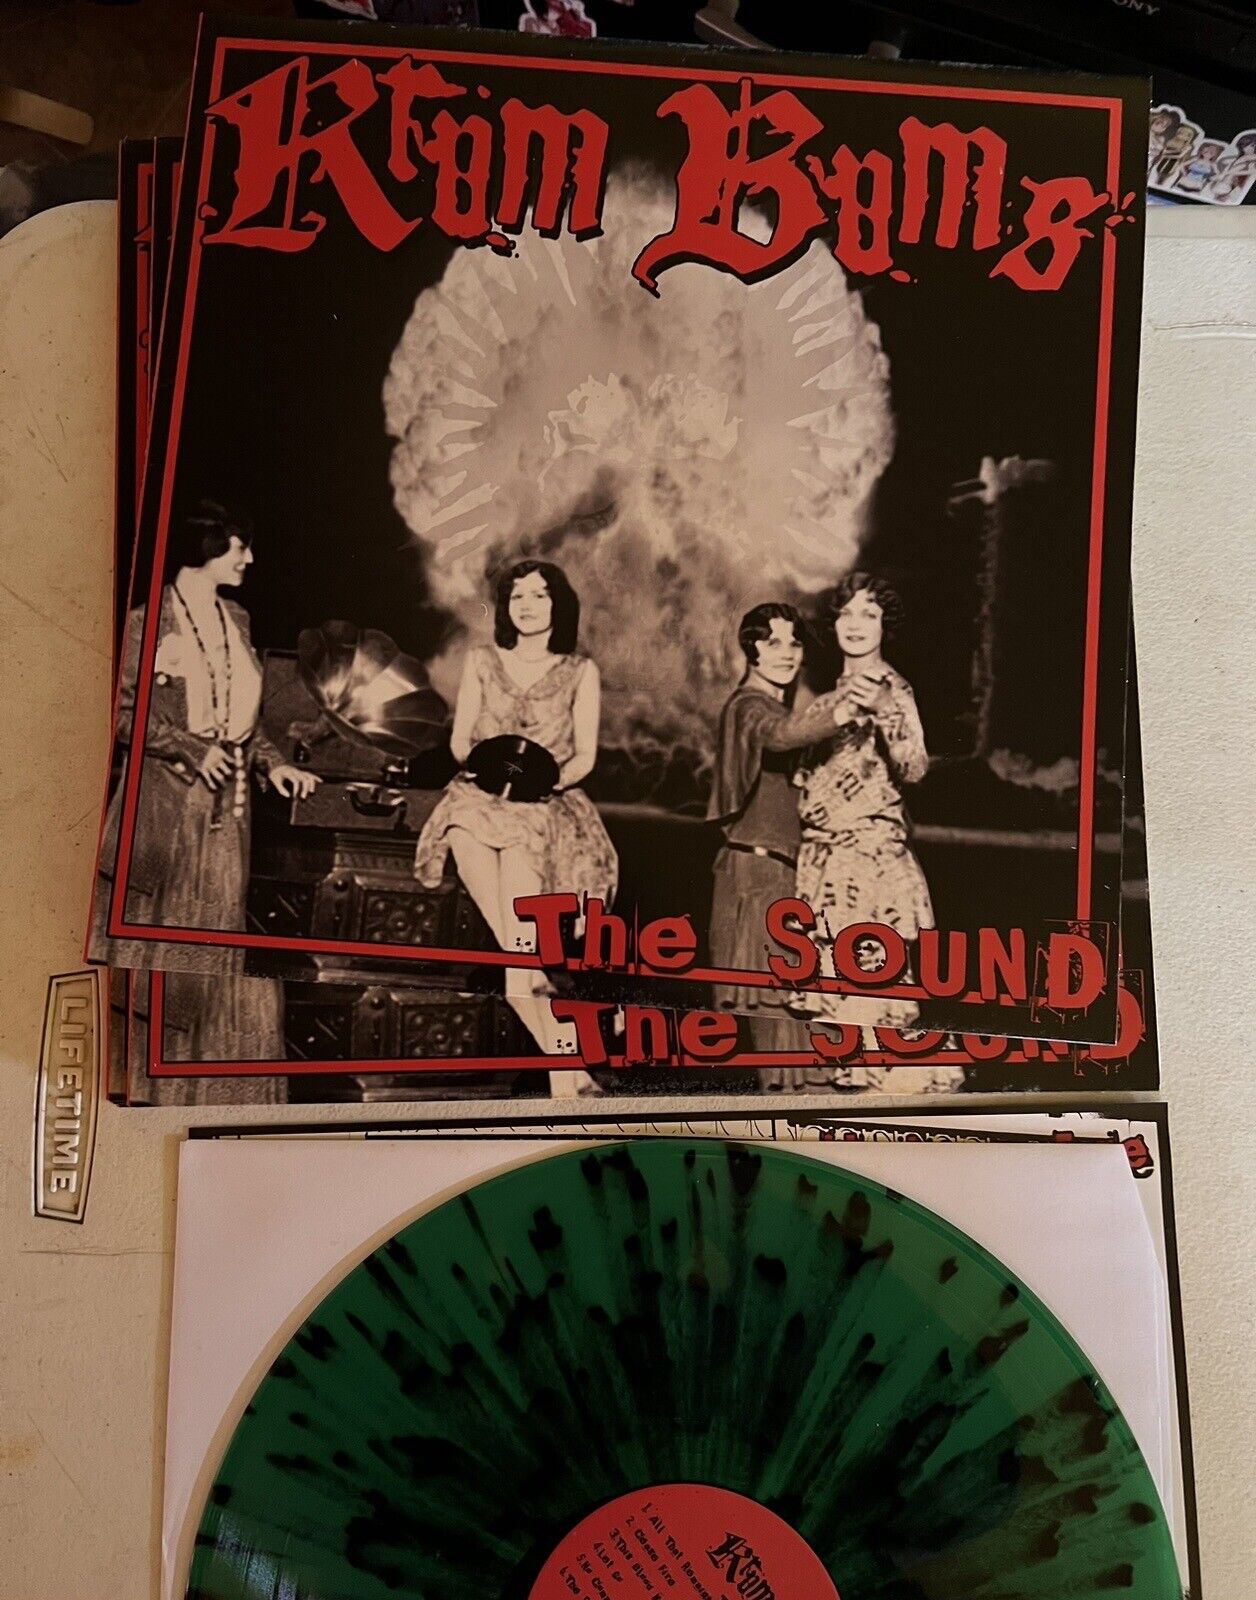 Krum Bums The Sound LP ATX Hardcore Punk The Casualties Starving Wolves Metal